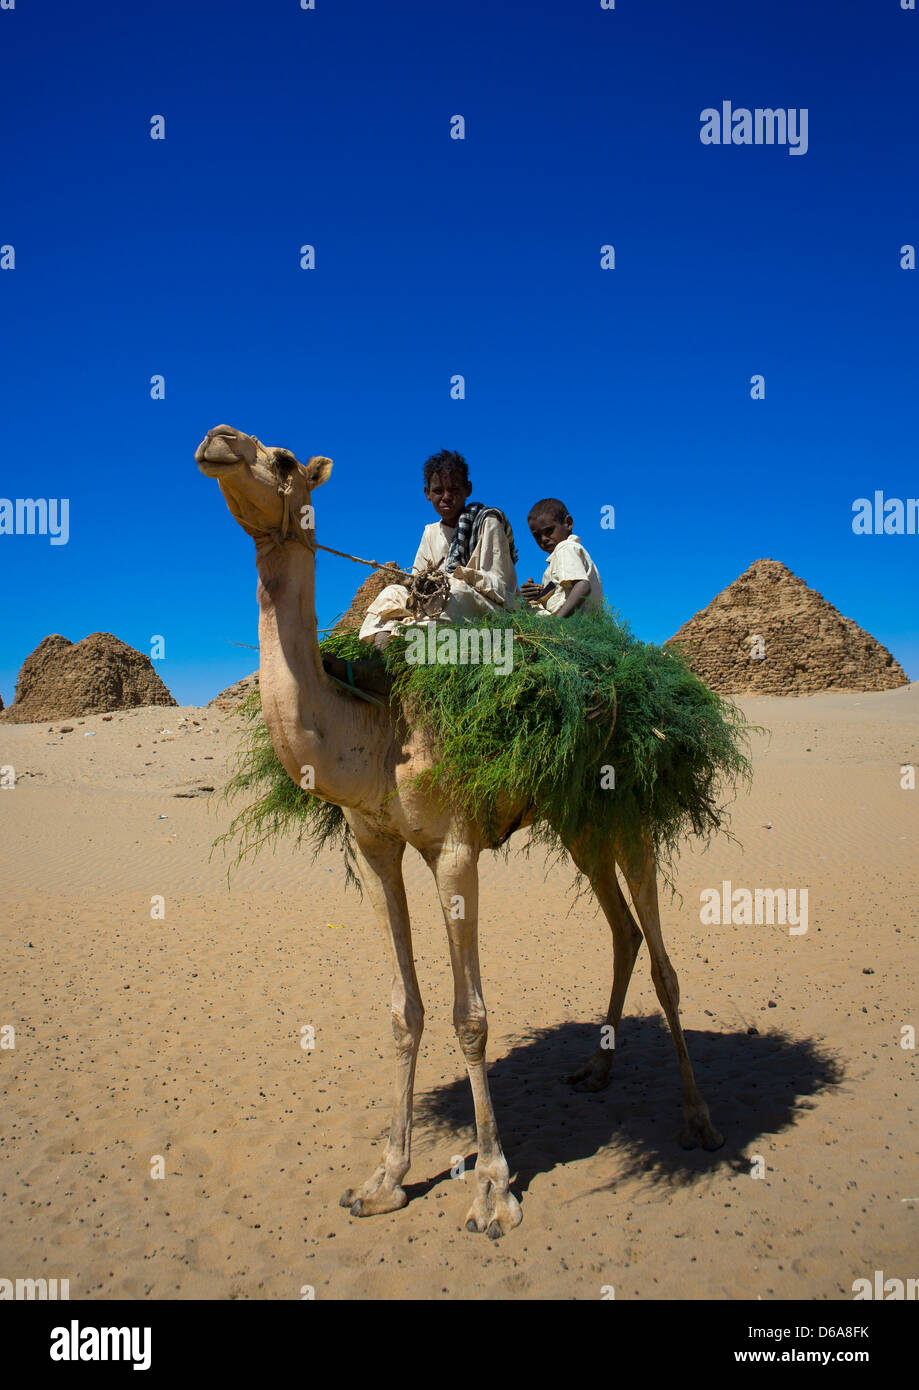 Kids On A Camel In Front Of The Royal Pyramids Of Napata, Nuri, Sudan Stock Photo